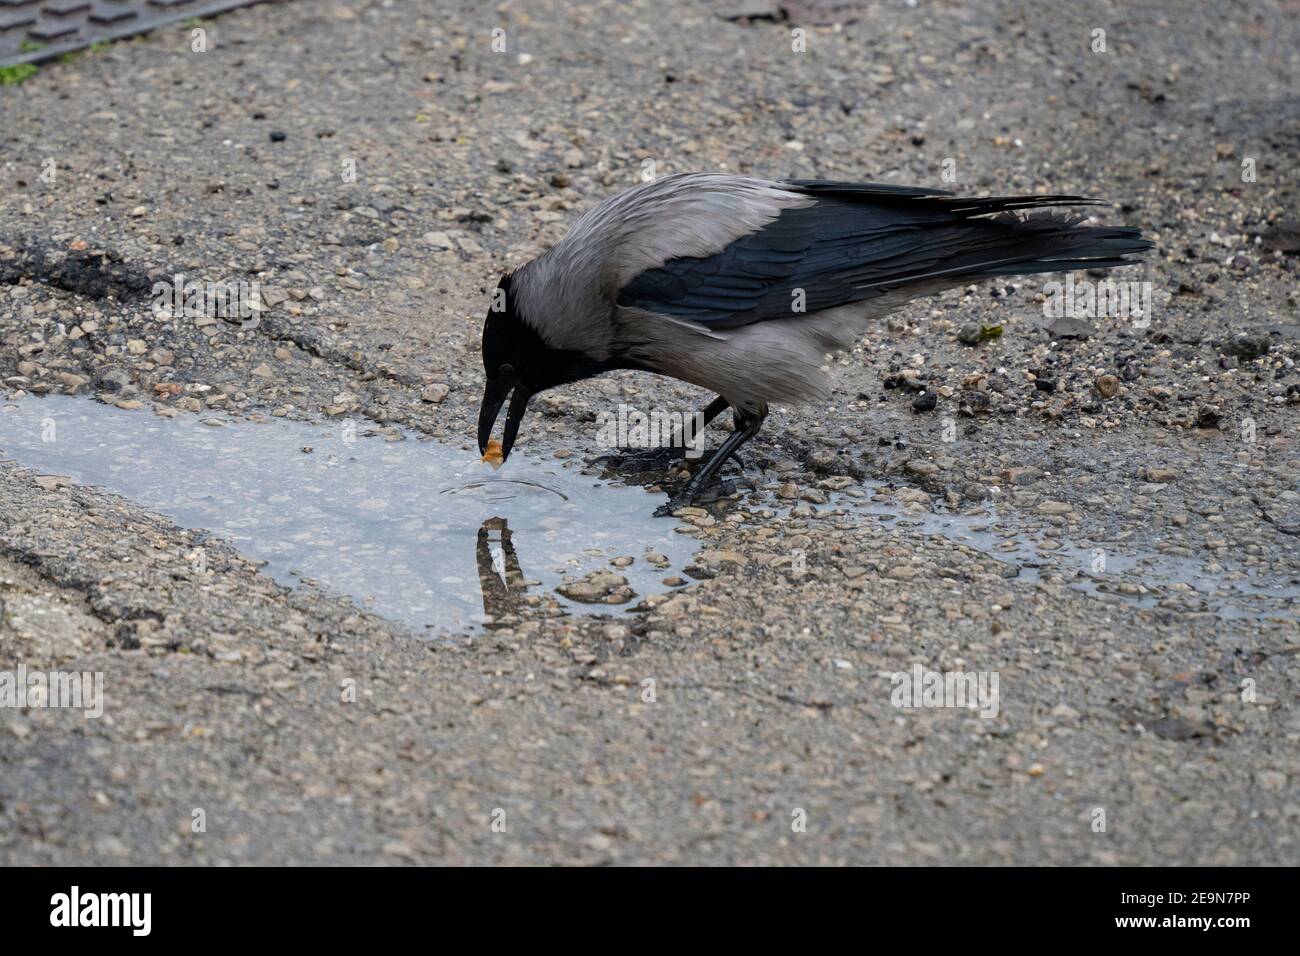 A gray crow wetting a piece of bread in a rain water puddle. Stock Photo